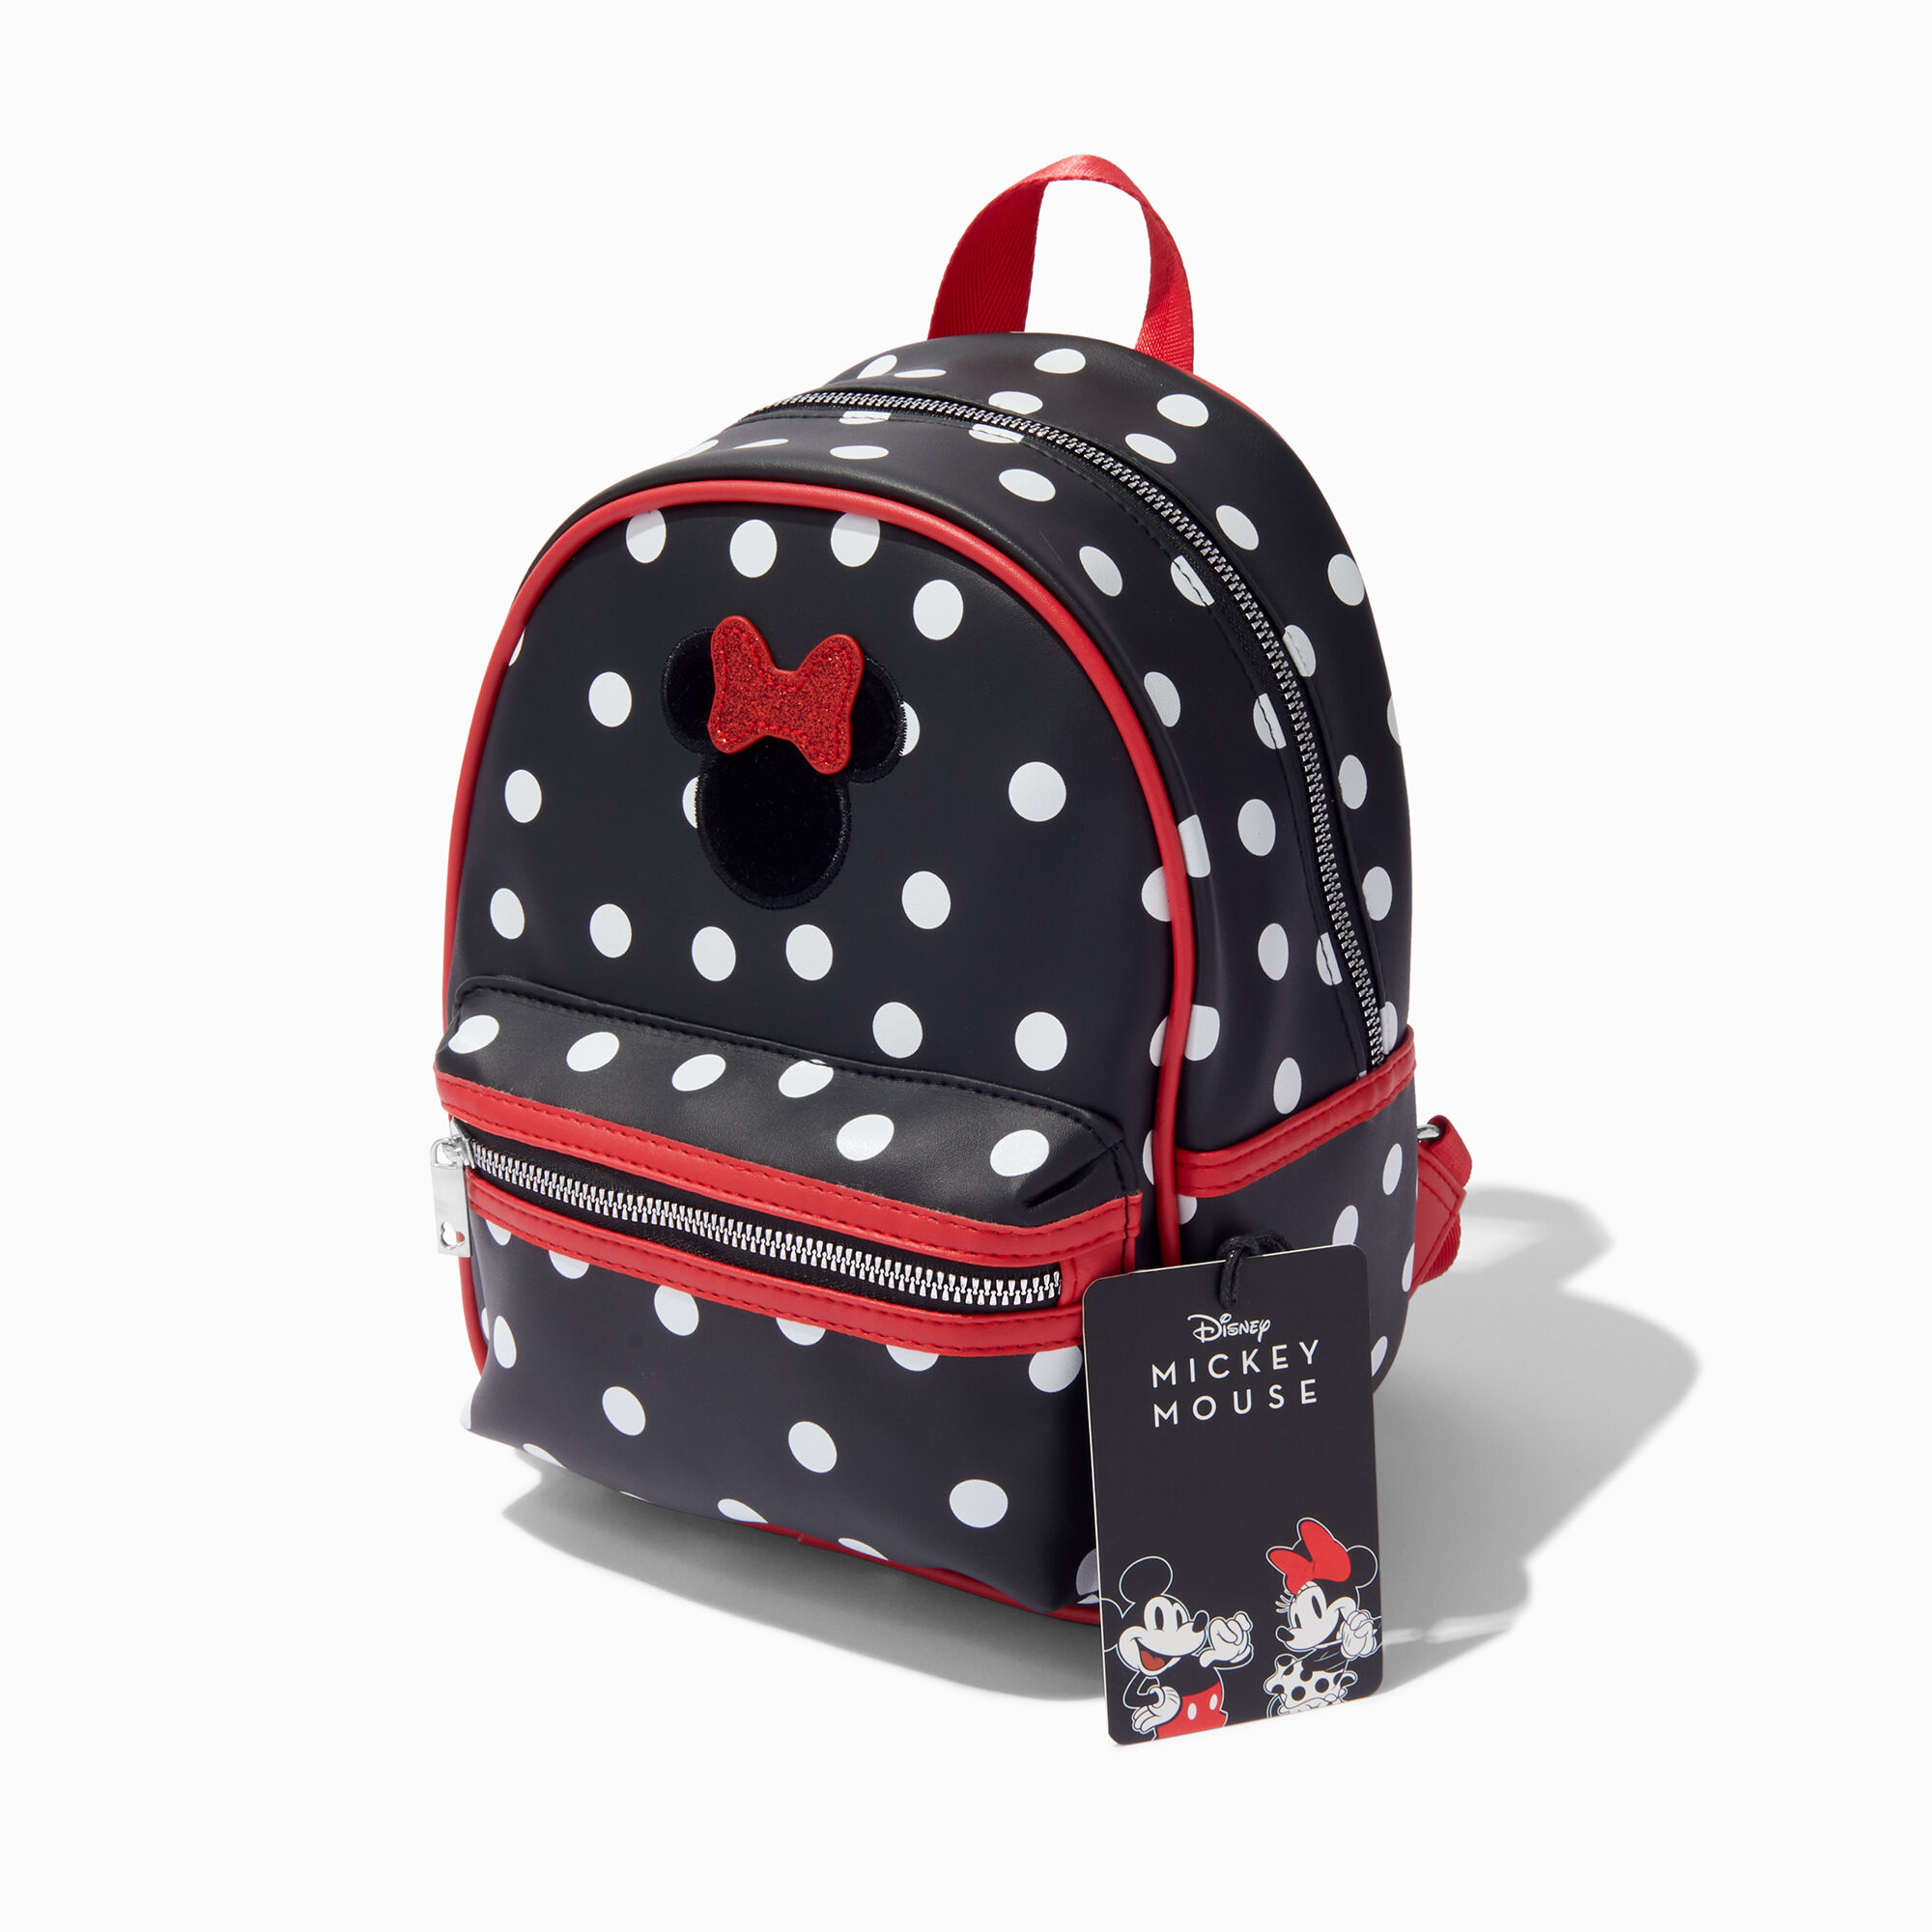 View Claires Disney 100 Minnie Mouse Polka Dot Backpack information